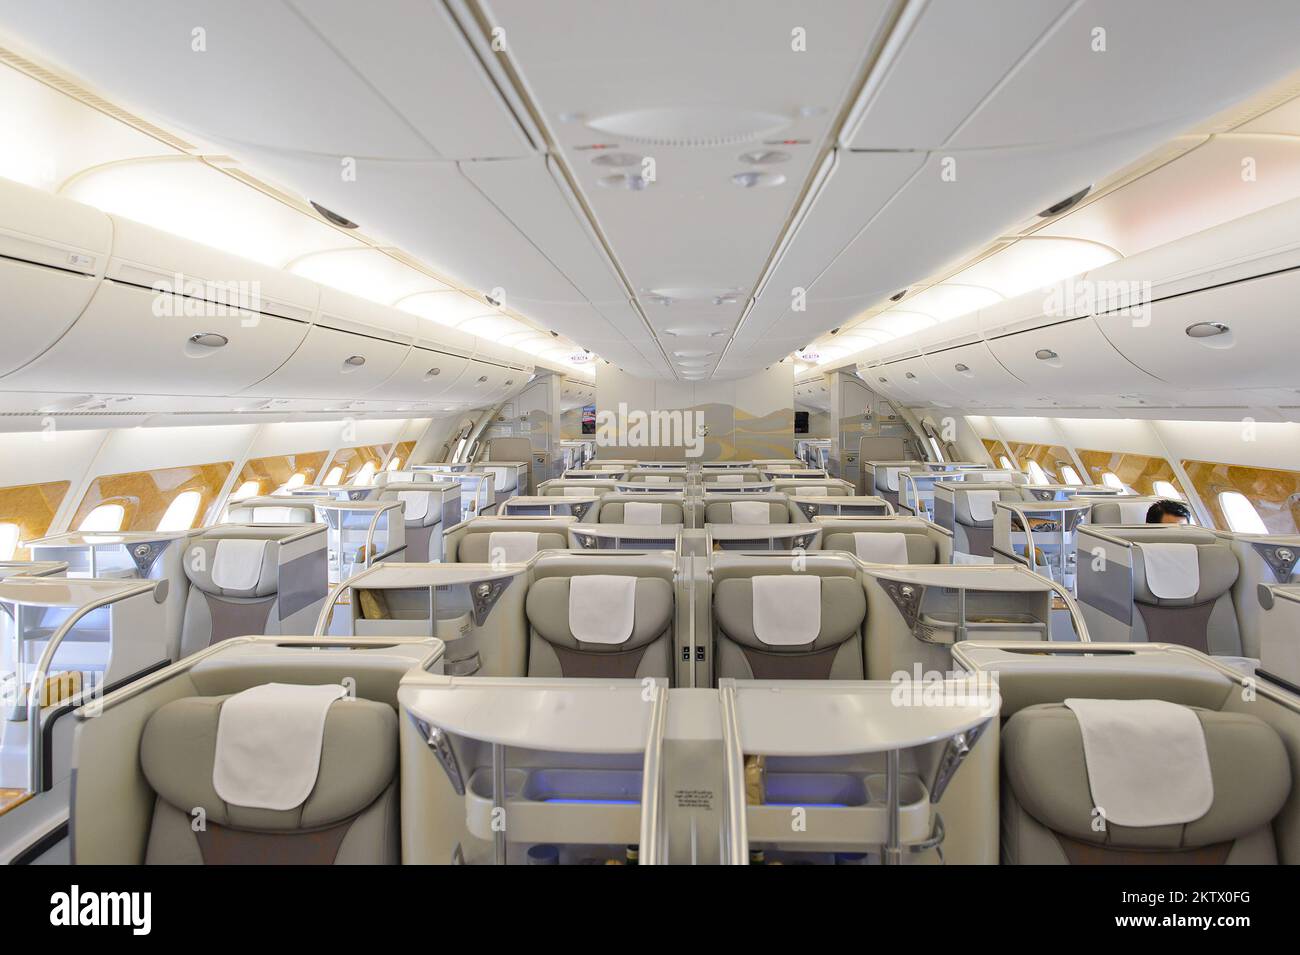 BANGKOK, THAILAND - MARCH 31, 2015: Emirates Airbus A380 business class interior. Emirates is one of two flag carriers of the United Arab Emirates alo Stock Photo